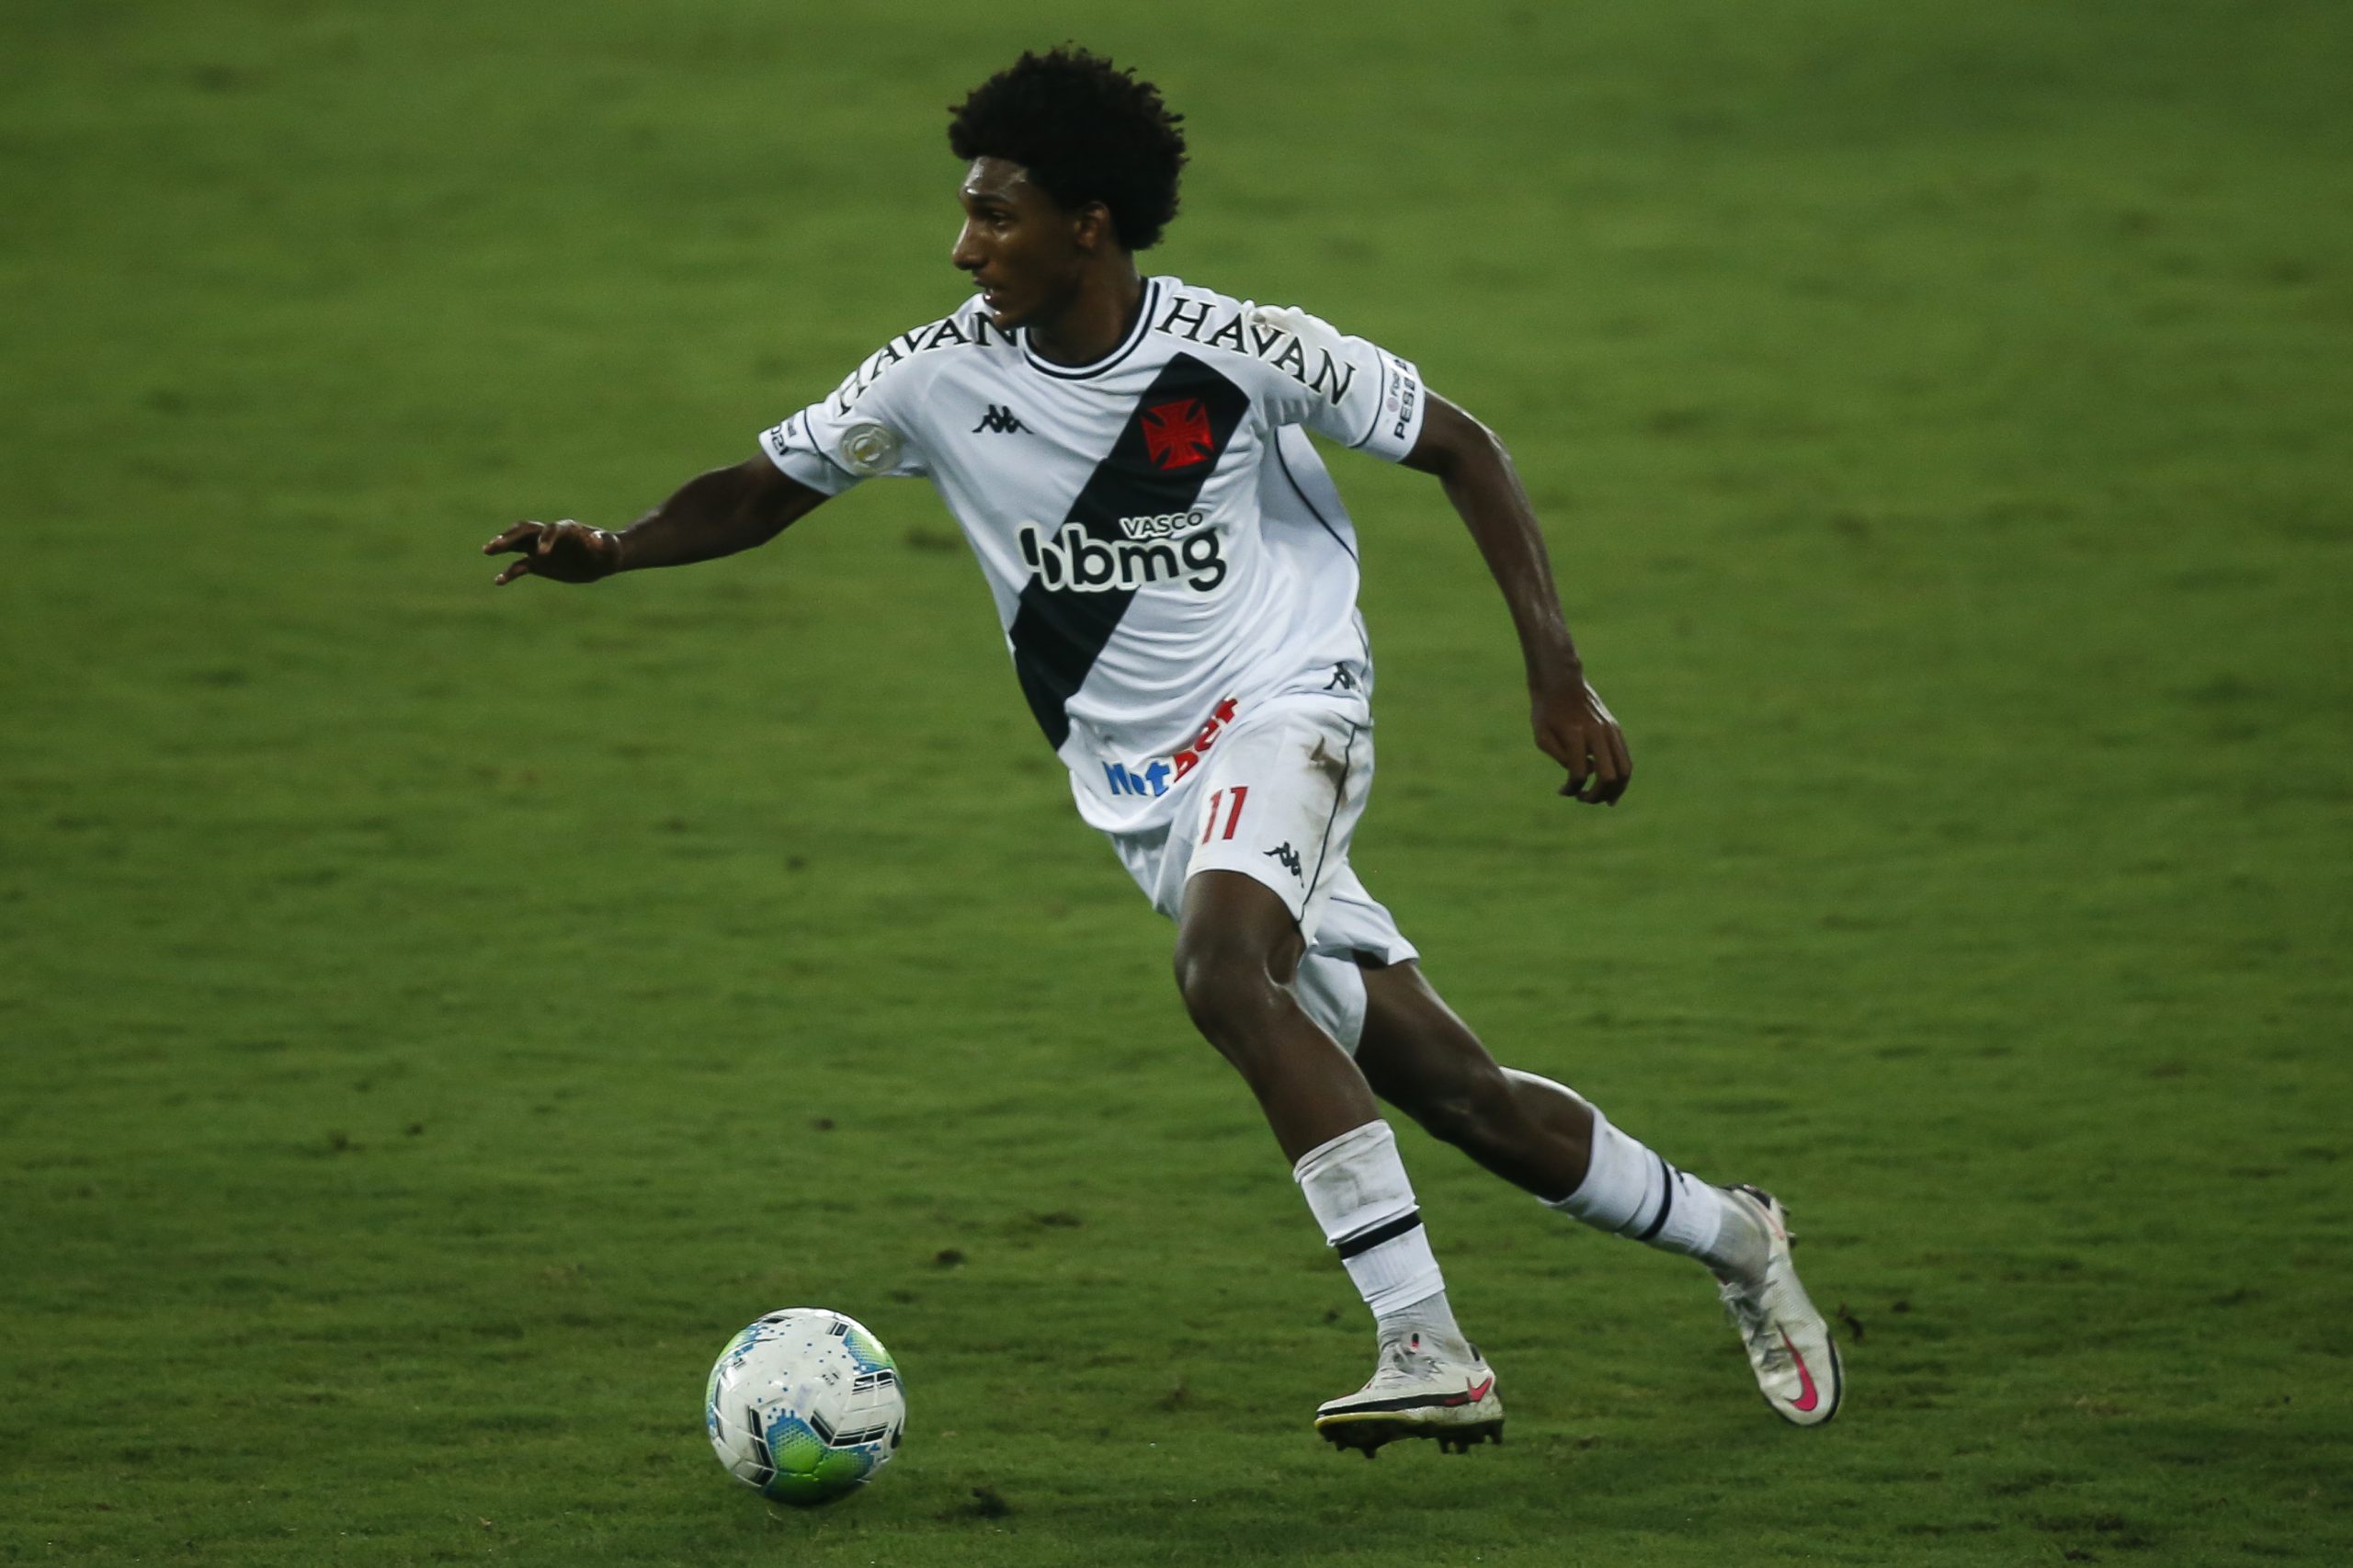 Talles Magno is one of the rising stars in Brazilian football